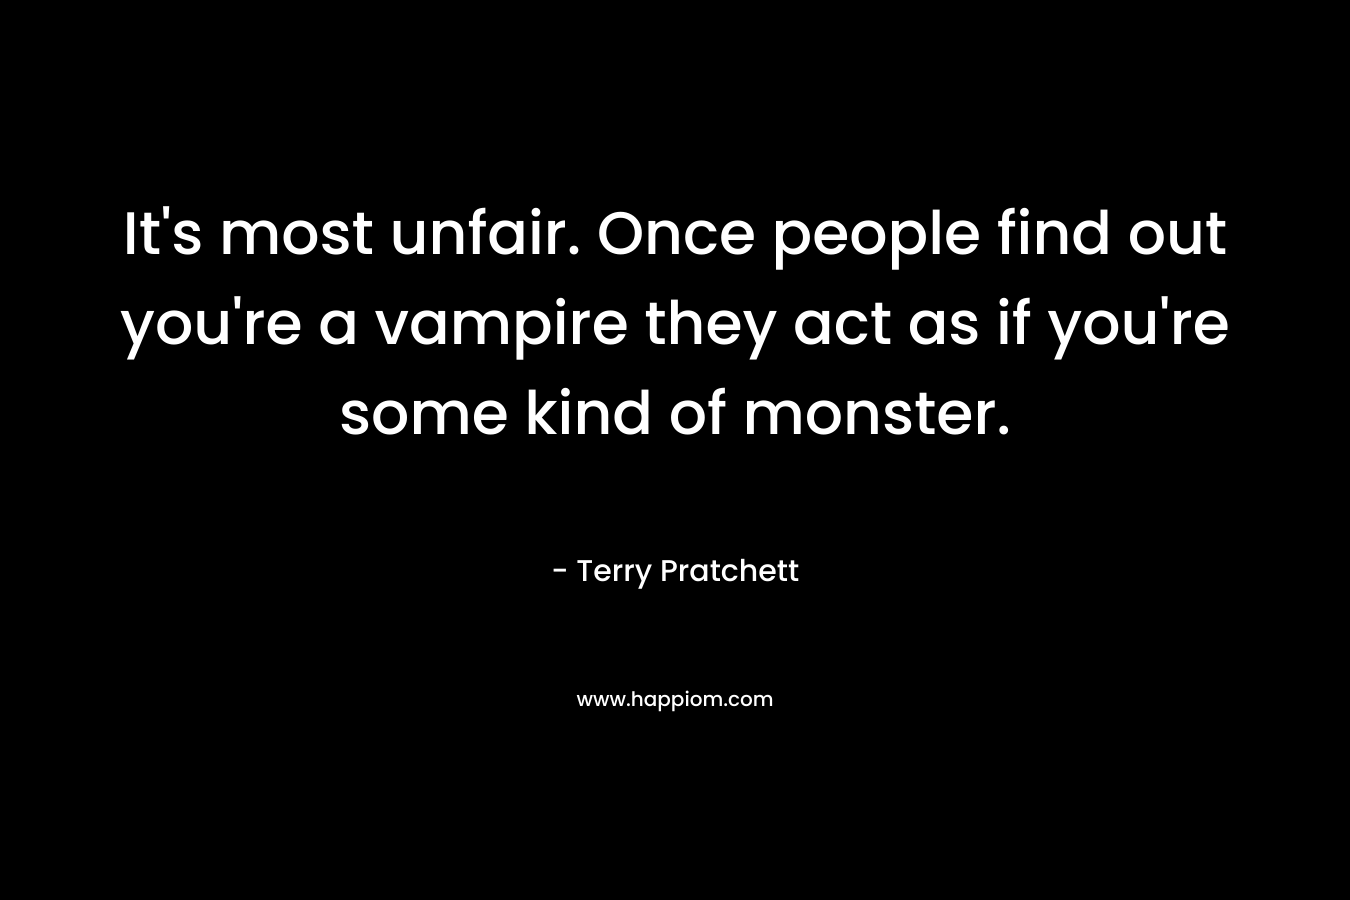 It's most unfair. Once people find out you're a vampire they act as if you're some kind of monster.